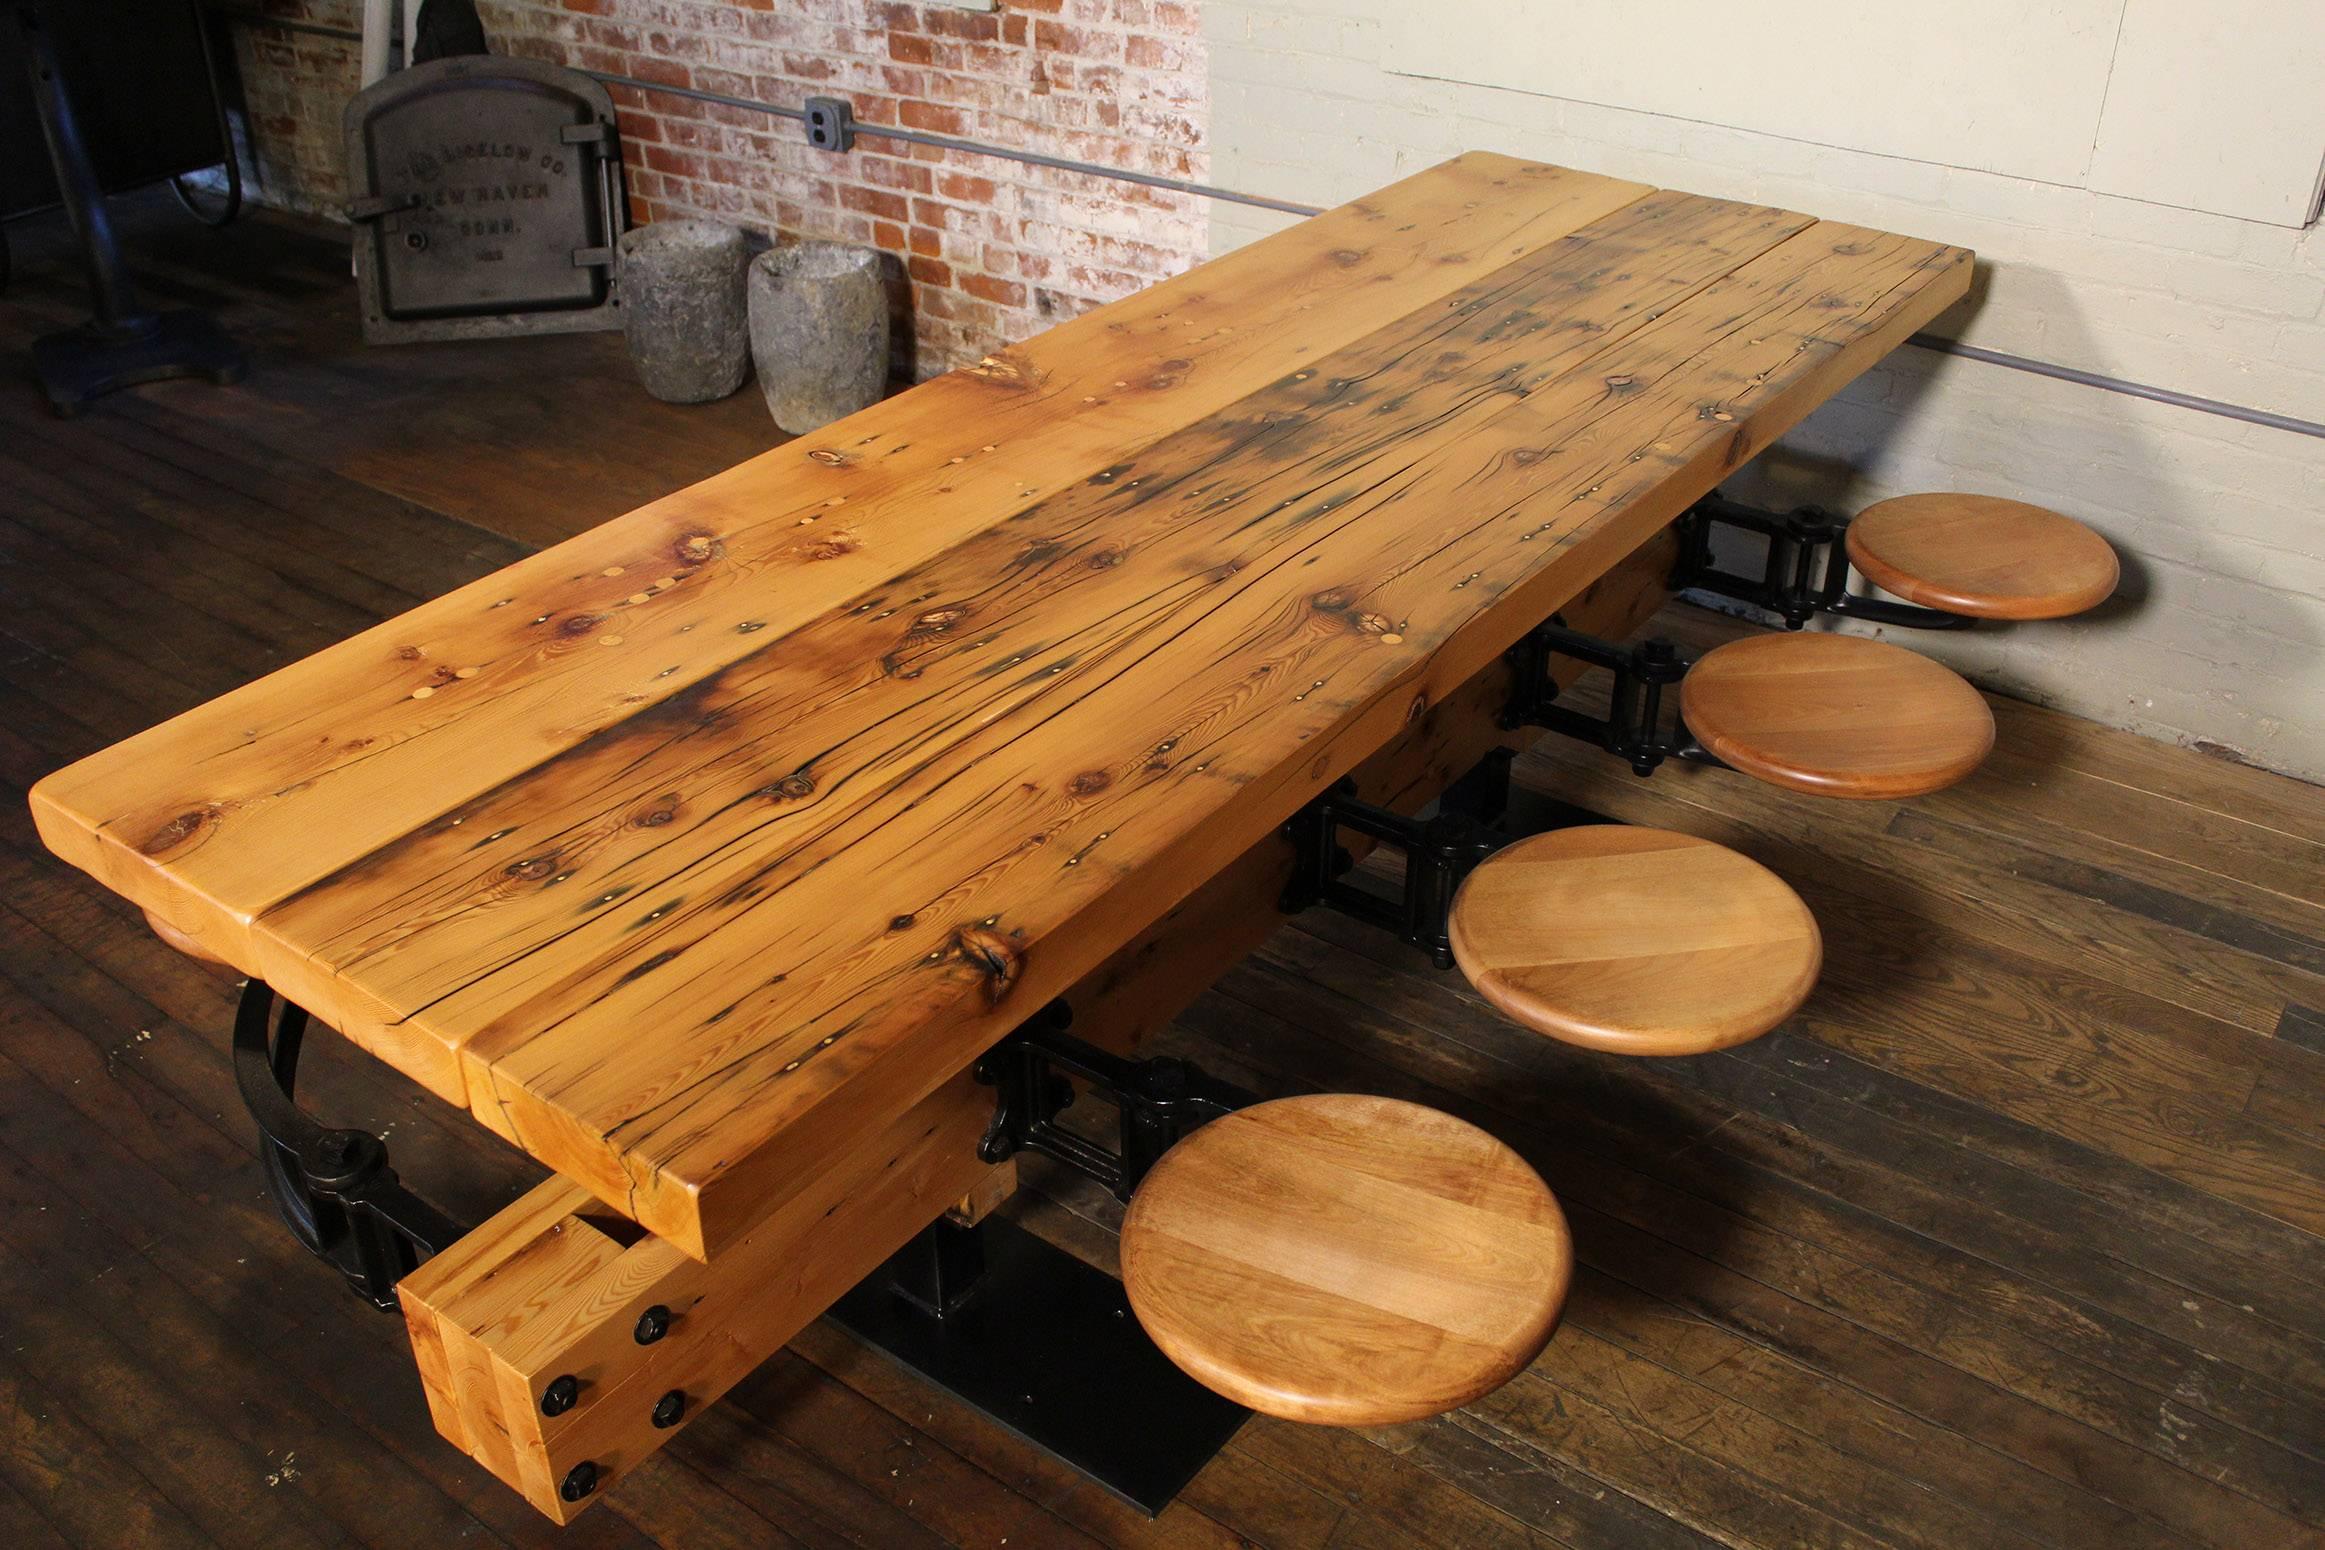 Steel Dining Table with Chairs, Reclaimed Wood and Cast Iron Eight-Seat Indoor Picnic For Sale